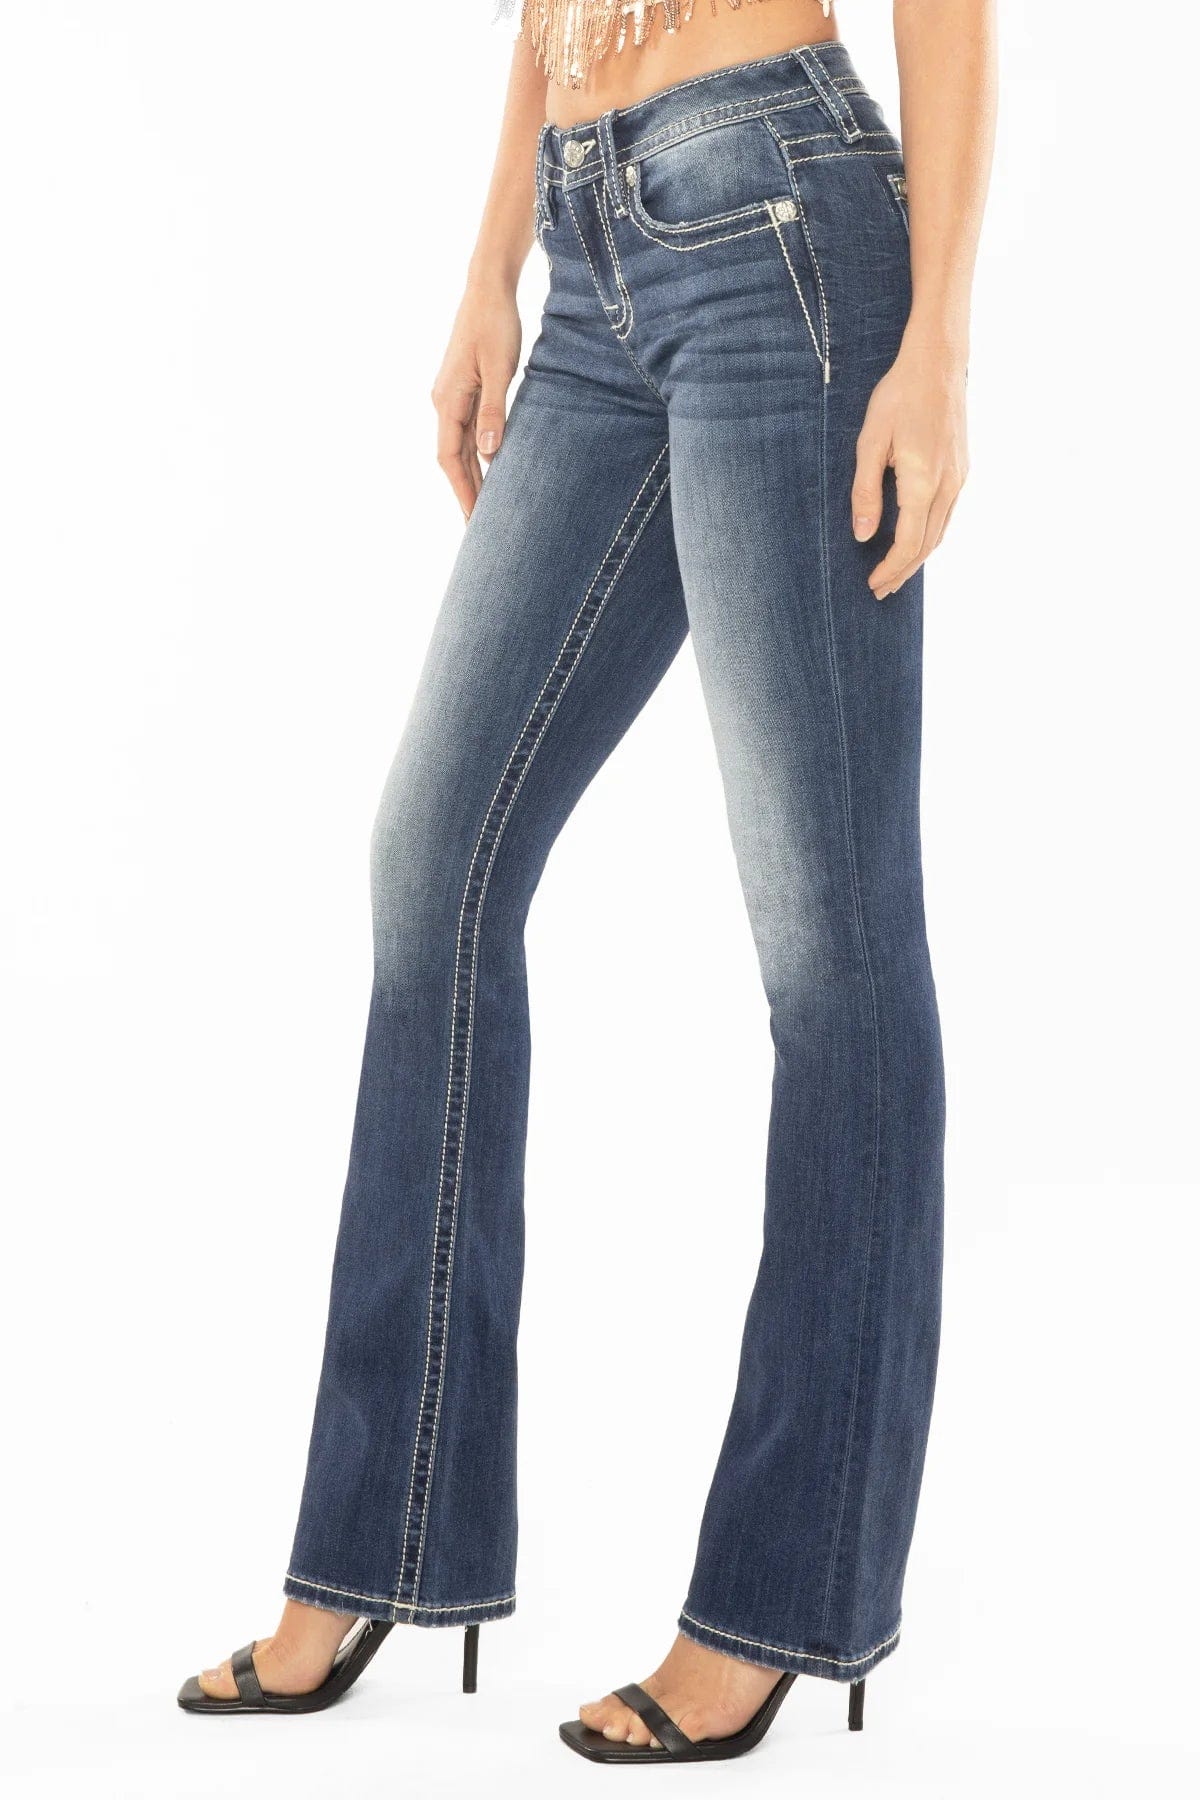 Miss Me Women's Metallic Floral Mid Rise Bootcut Jeans M9223BV - Russell's  Western Wear, Inc.